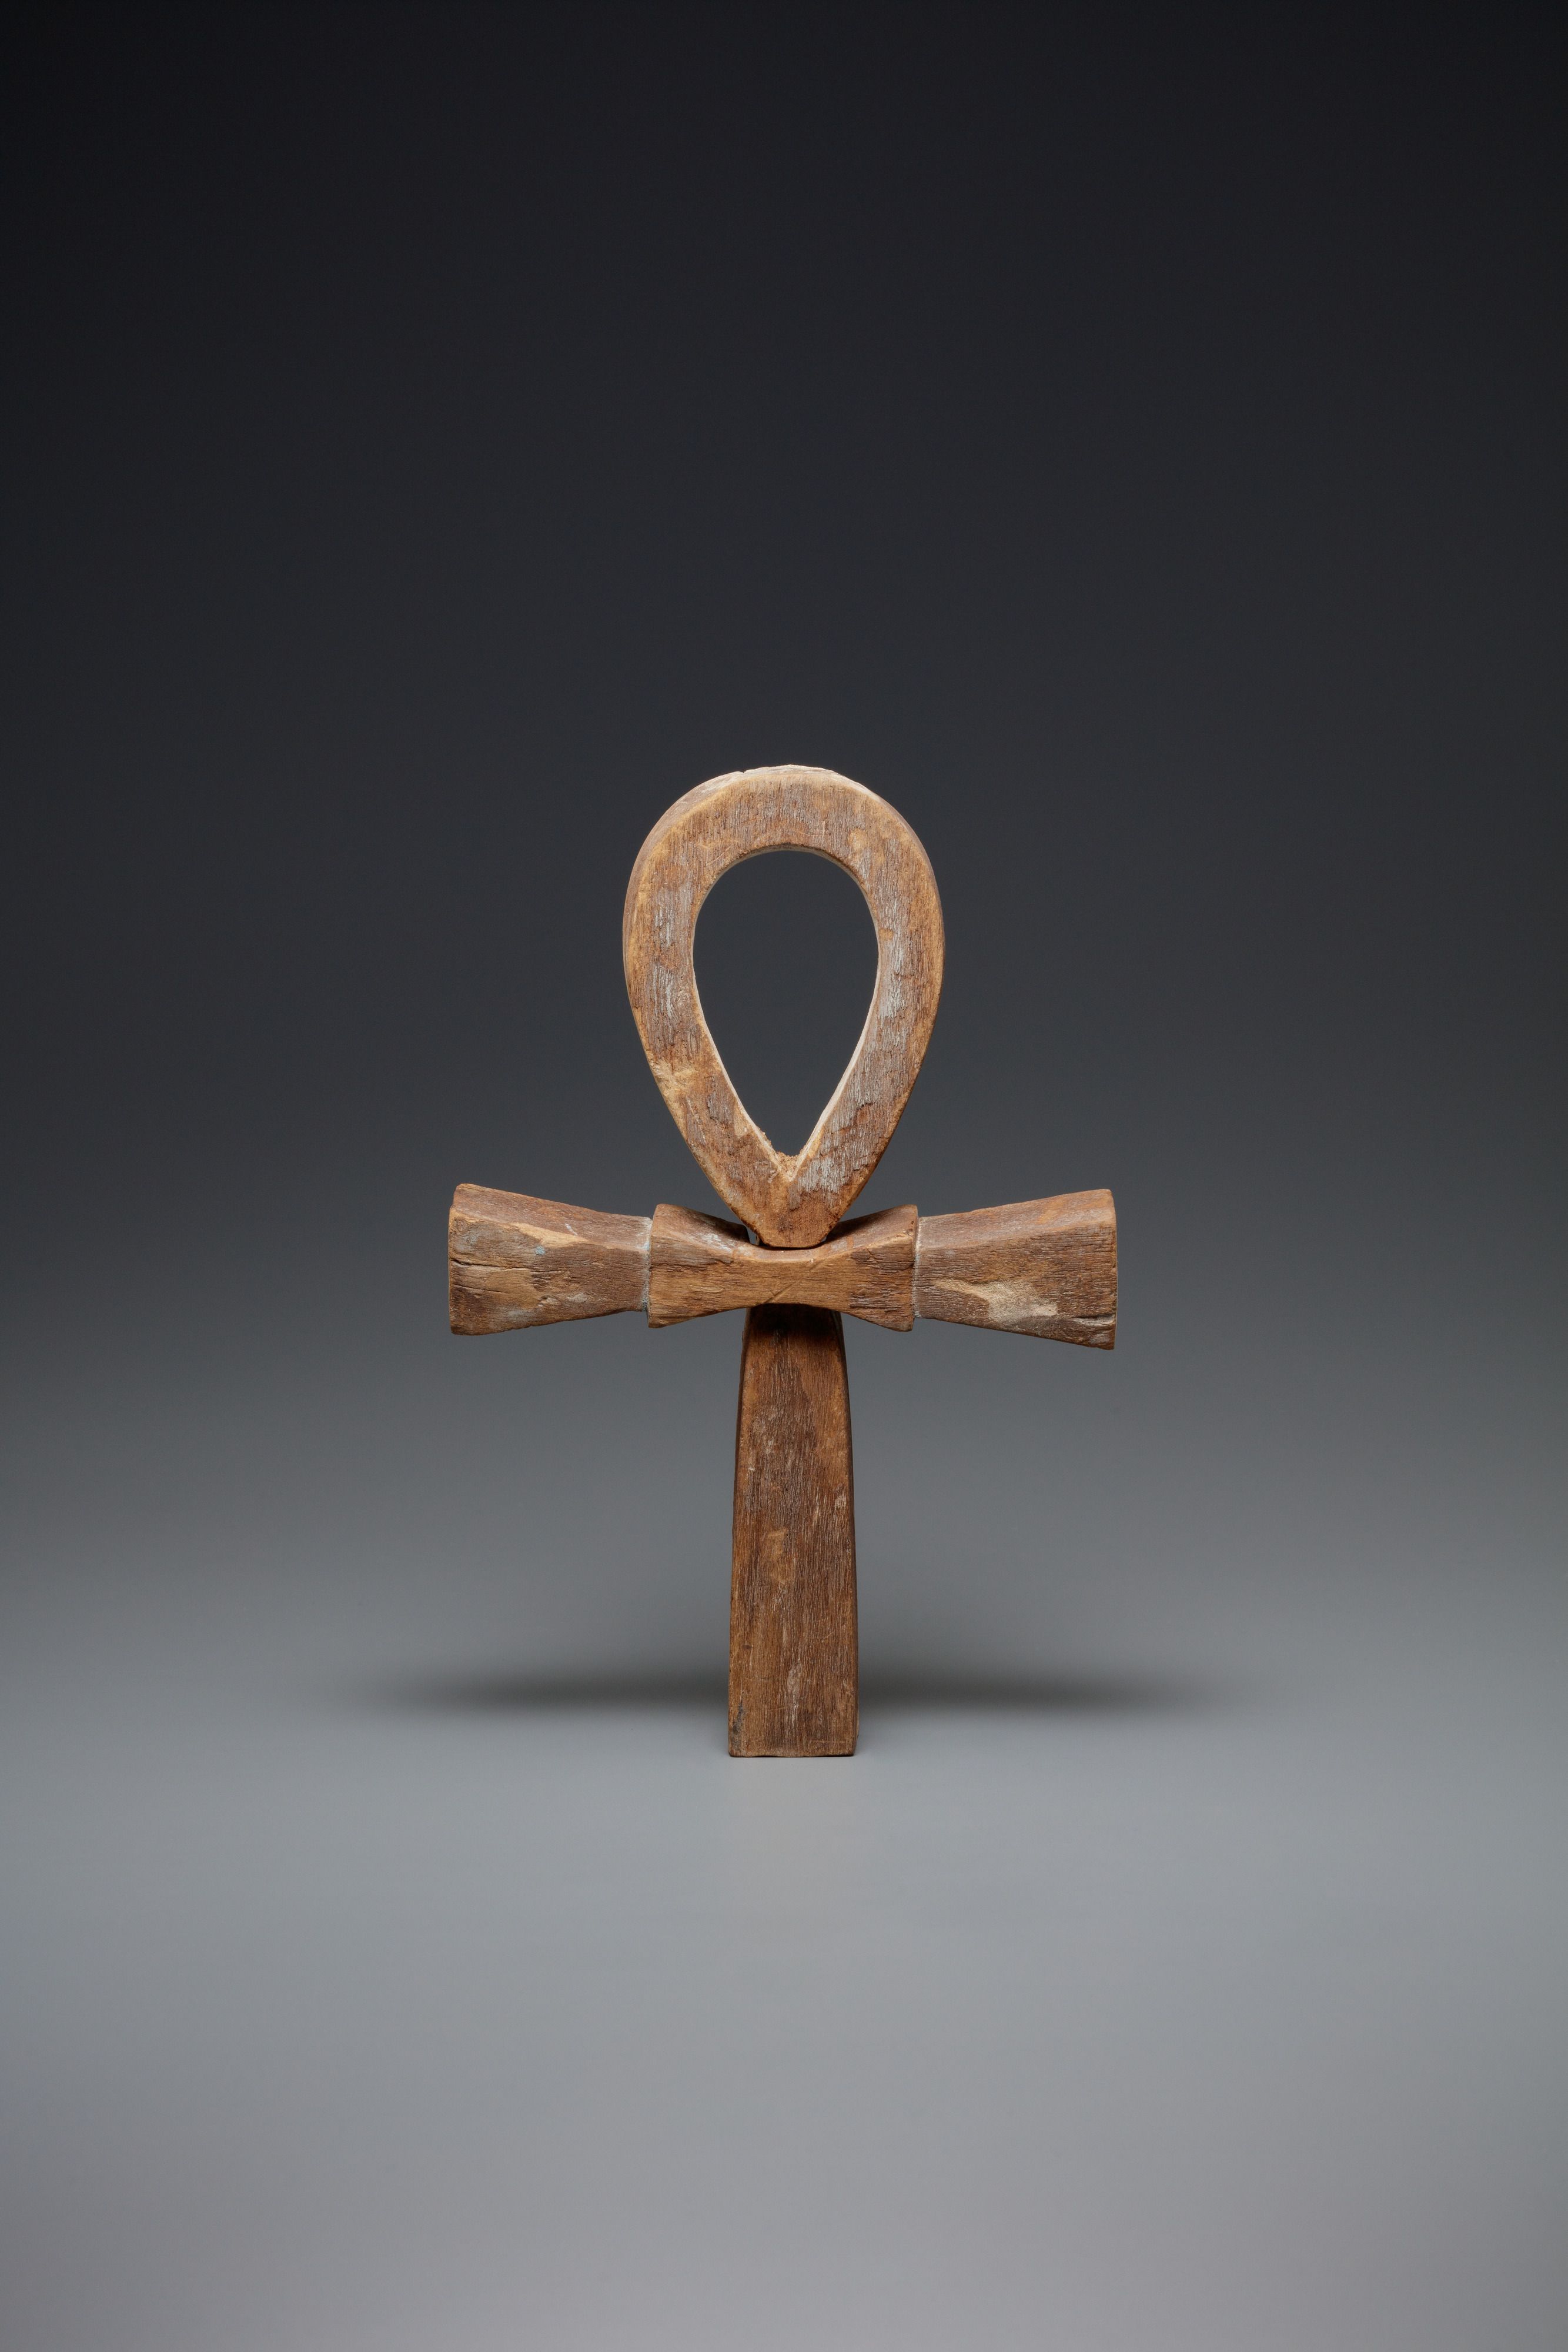 Ankh from Egypt c.a. 1981-1802 B.C. The Metropolitan Museum of Art. 